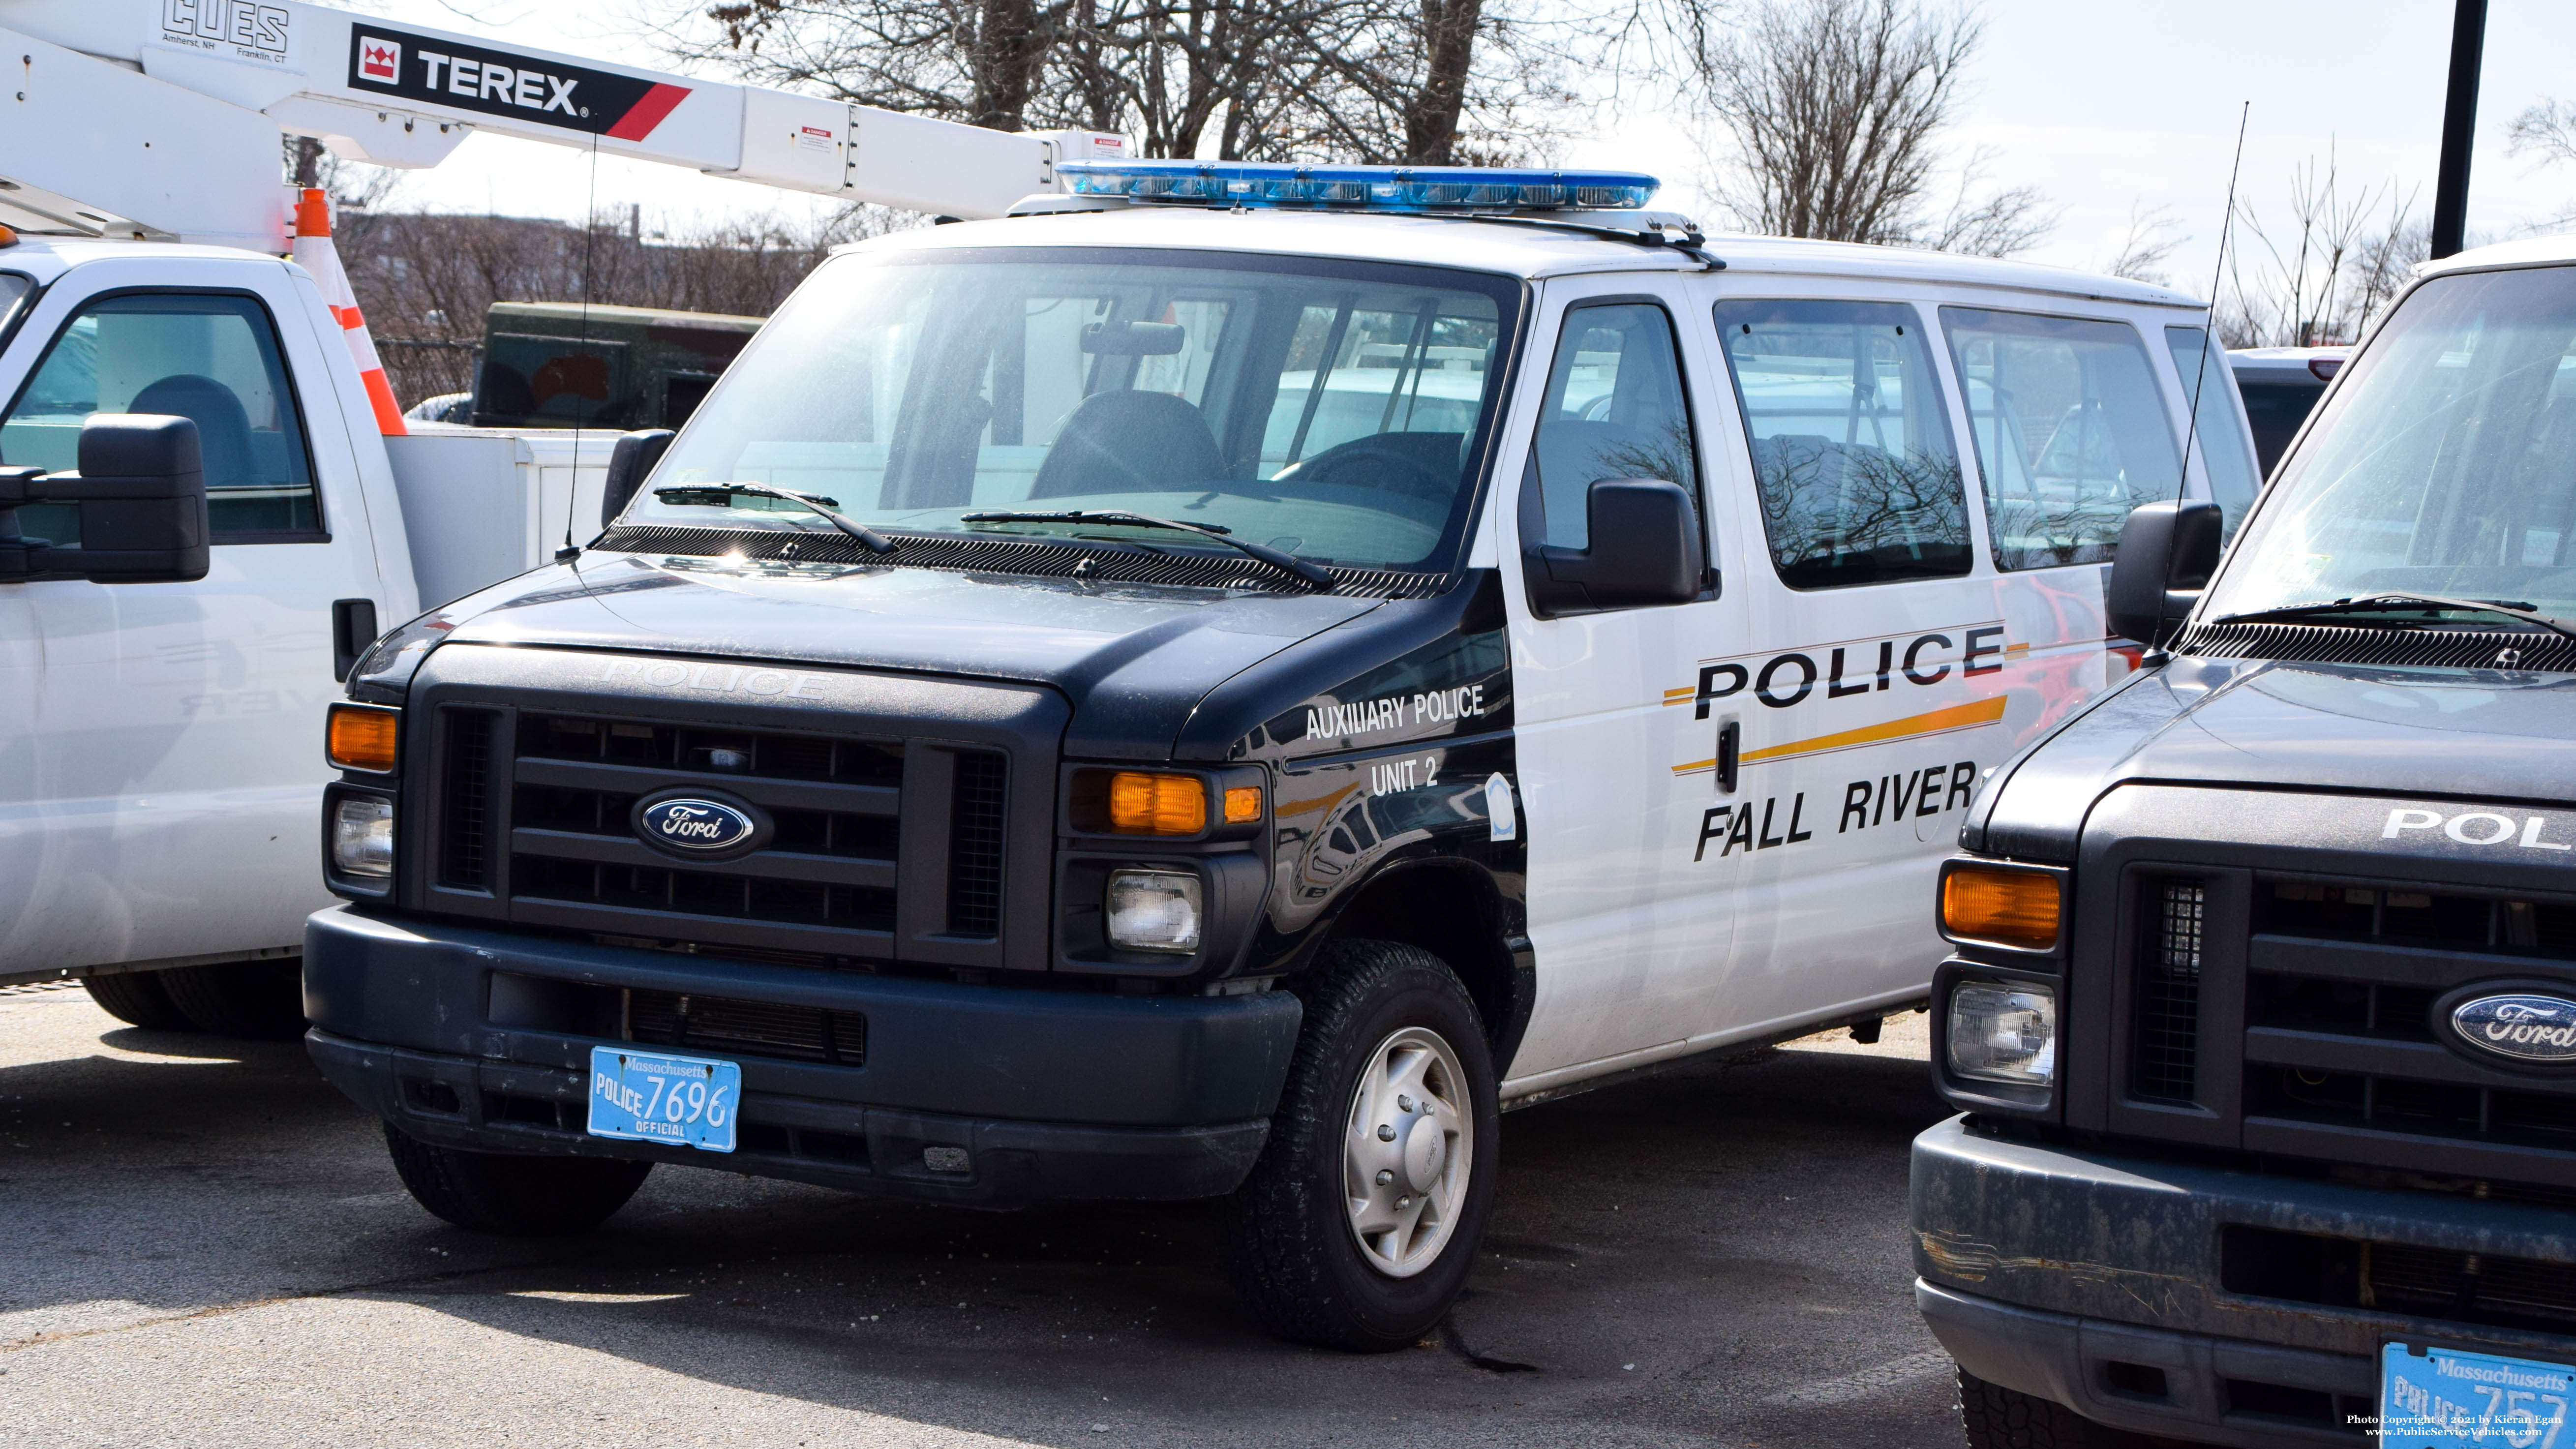 A photo  of Fall River Police
            Auxiliary Police Unit 2, a 2008 Ford E-350             taken by Kieran Egan